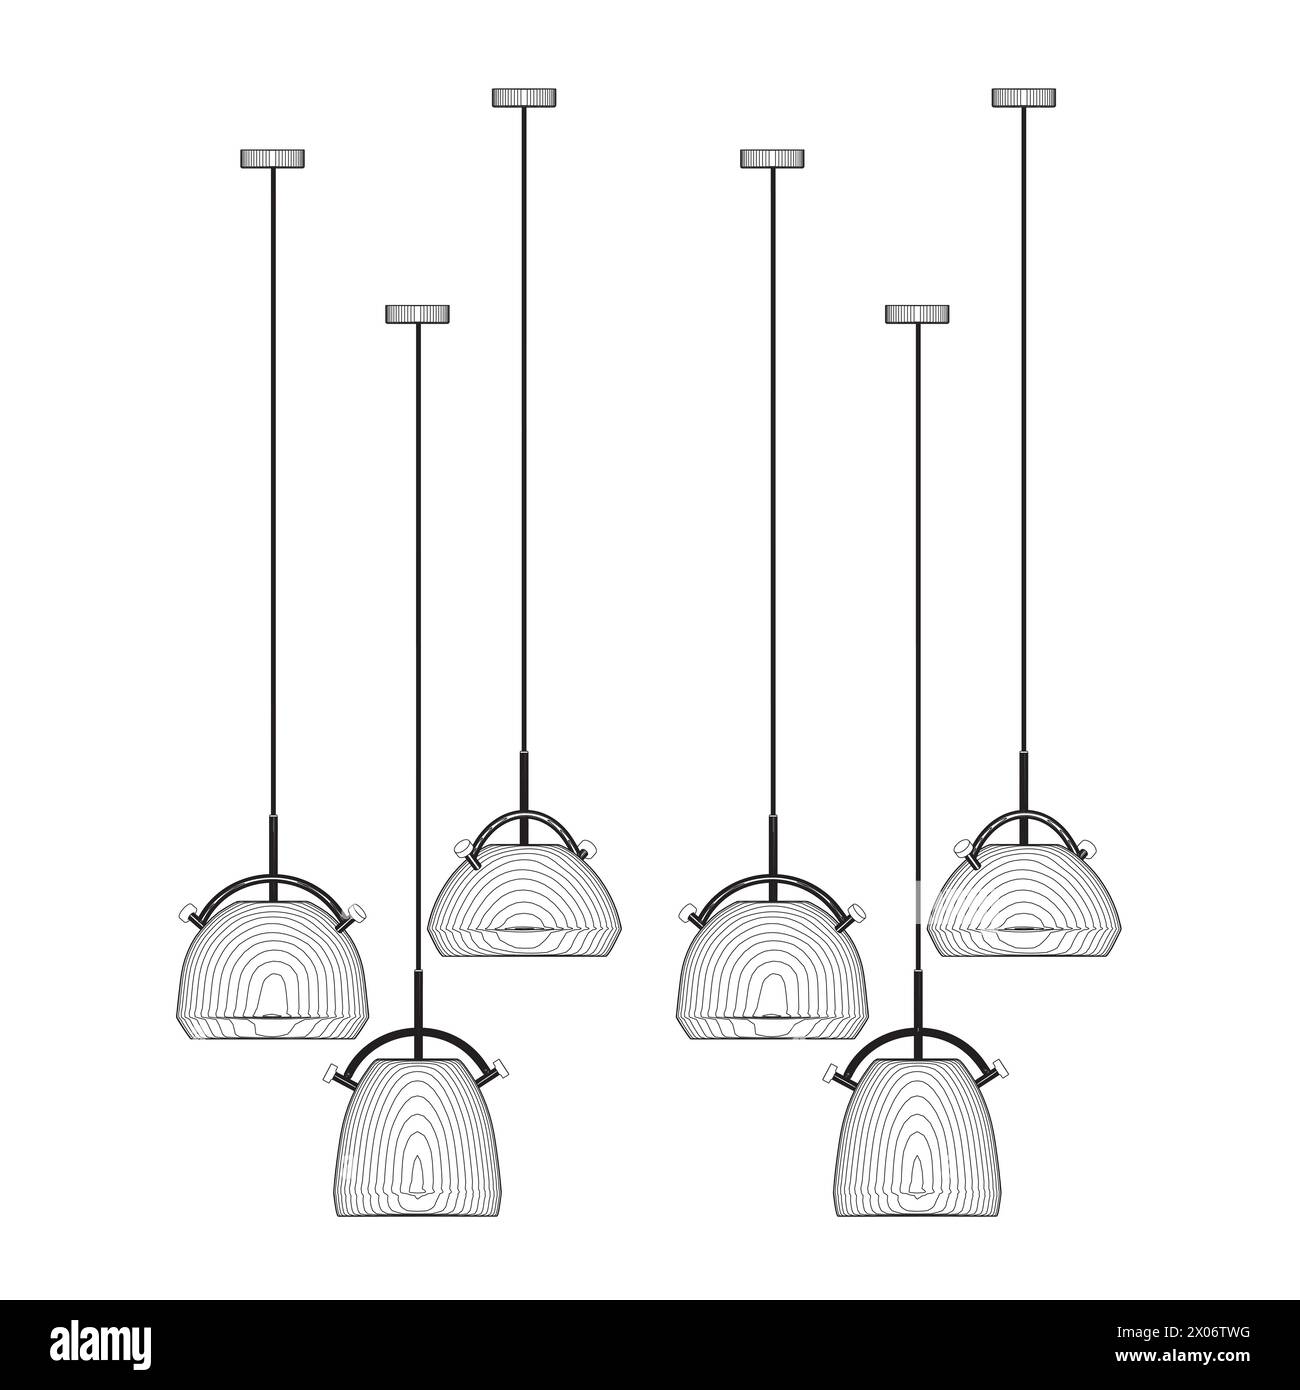 Contour of Hanging ceiling lamps. Set Object isolated. Vector illustration. Stock Vector